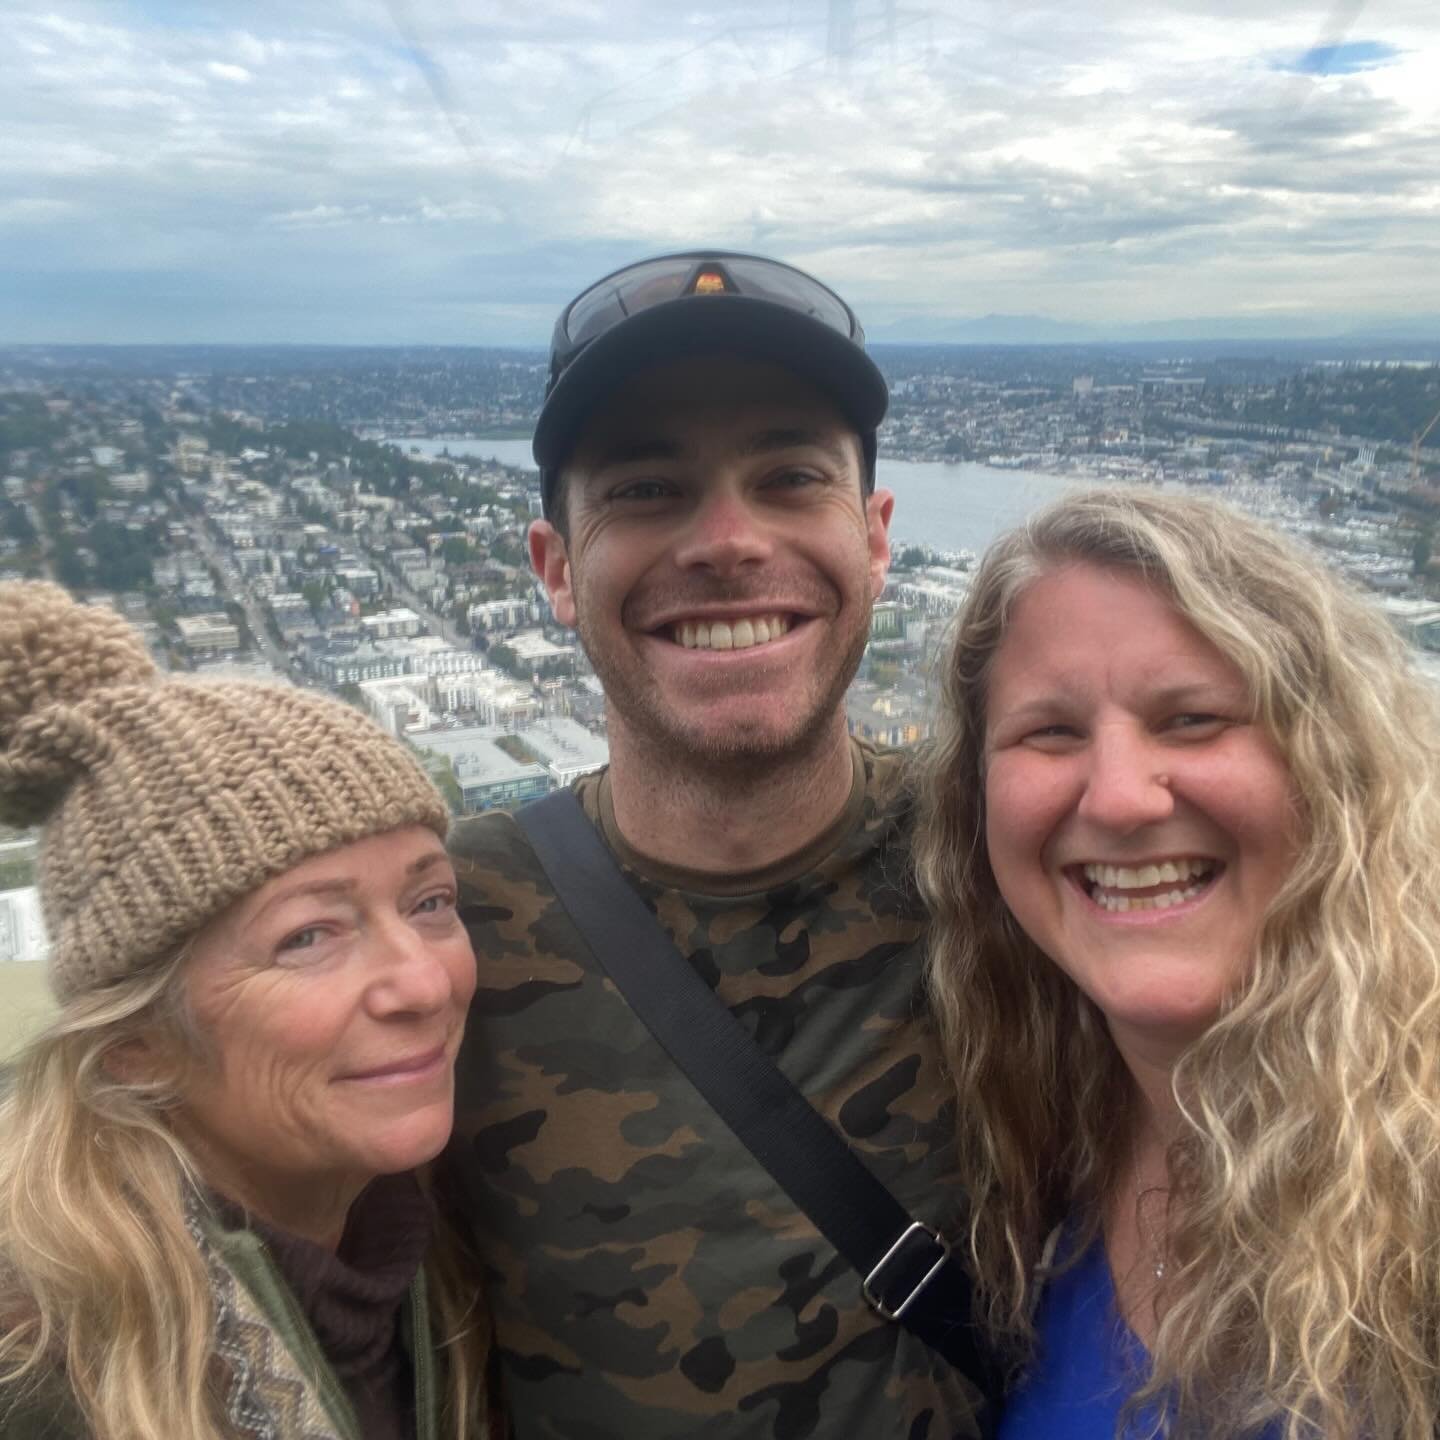 While at the top of the Space Needle, you can lean into breathtaking views through floor-to-forever glass on their unique glass benches, though I personally had trouble with that due to my fear of heights. Sadly it was very cloudy on 9/22/21 so we co